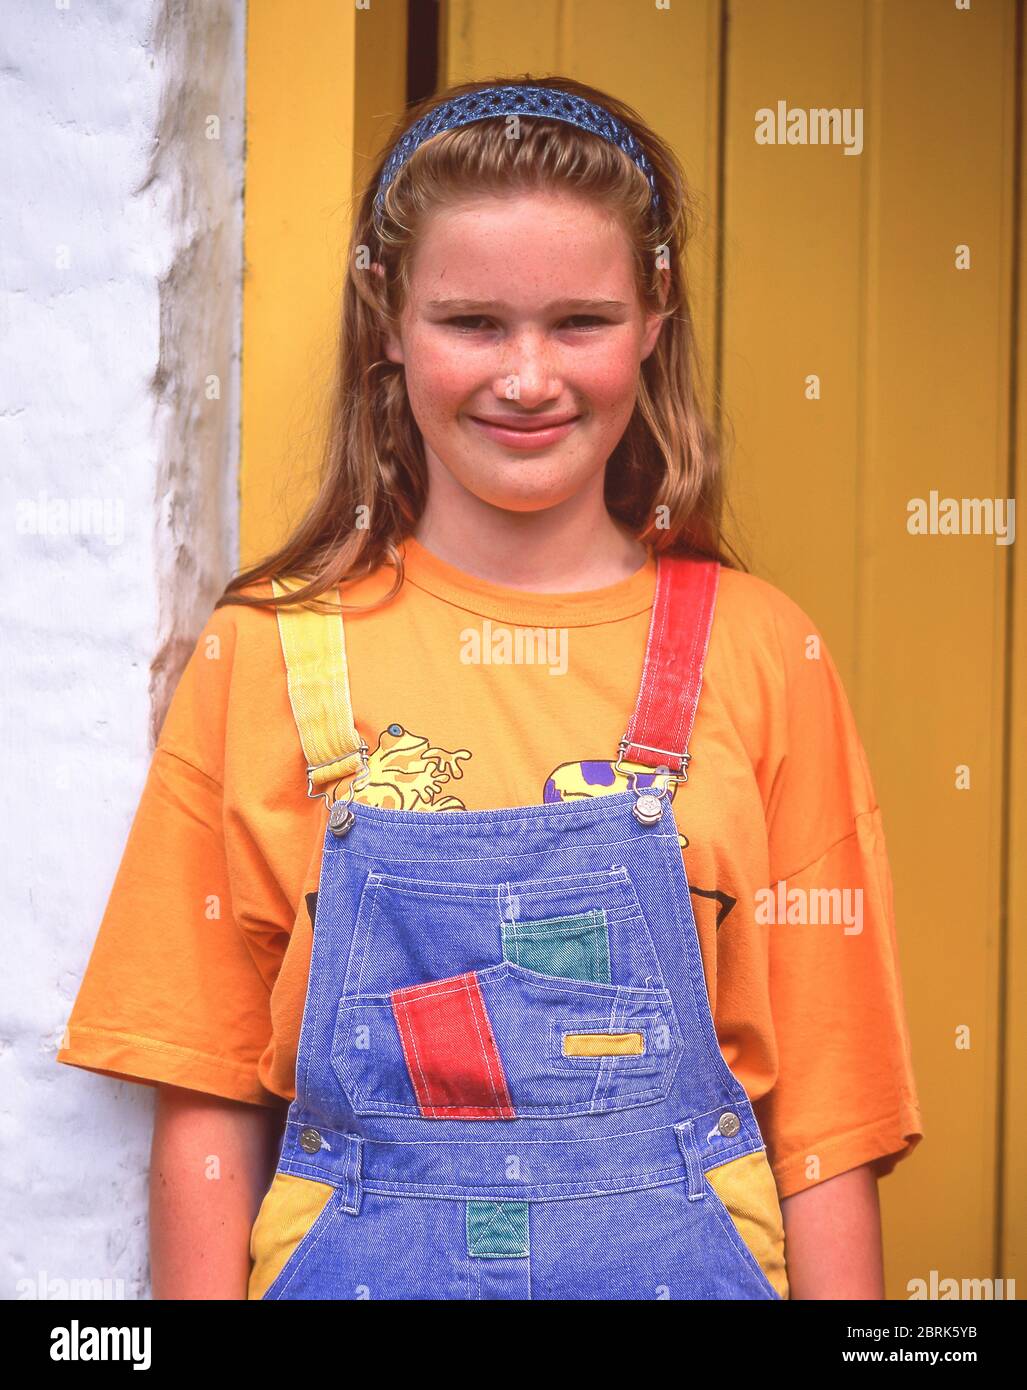 Young smiling Irish girl outside farmhouse, Ulster Folk & Transport Museum, County Down, Northern Ireland, United Kingdom Stock Photo